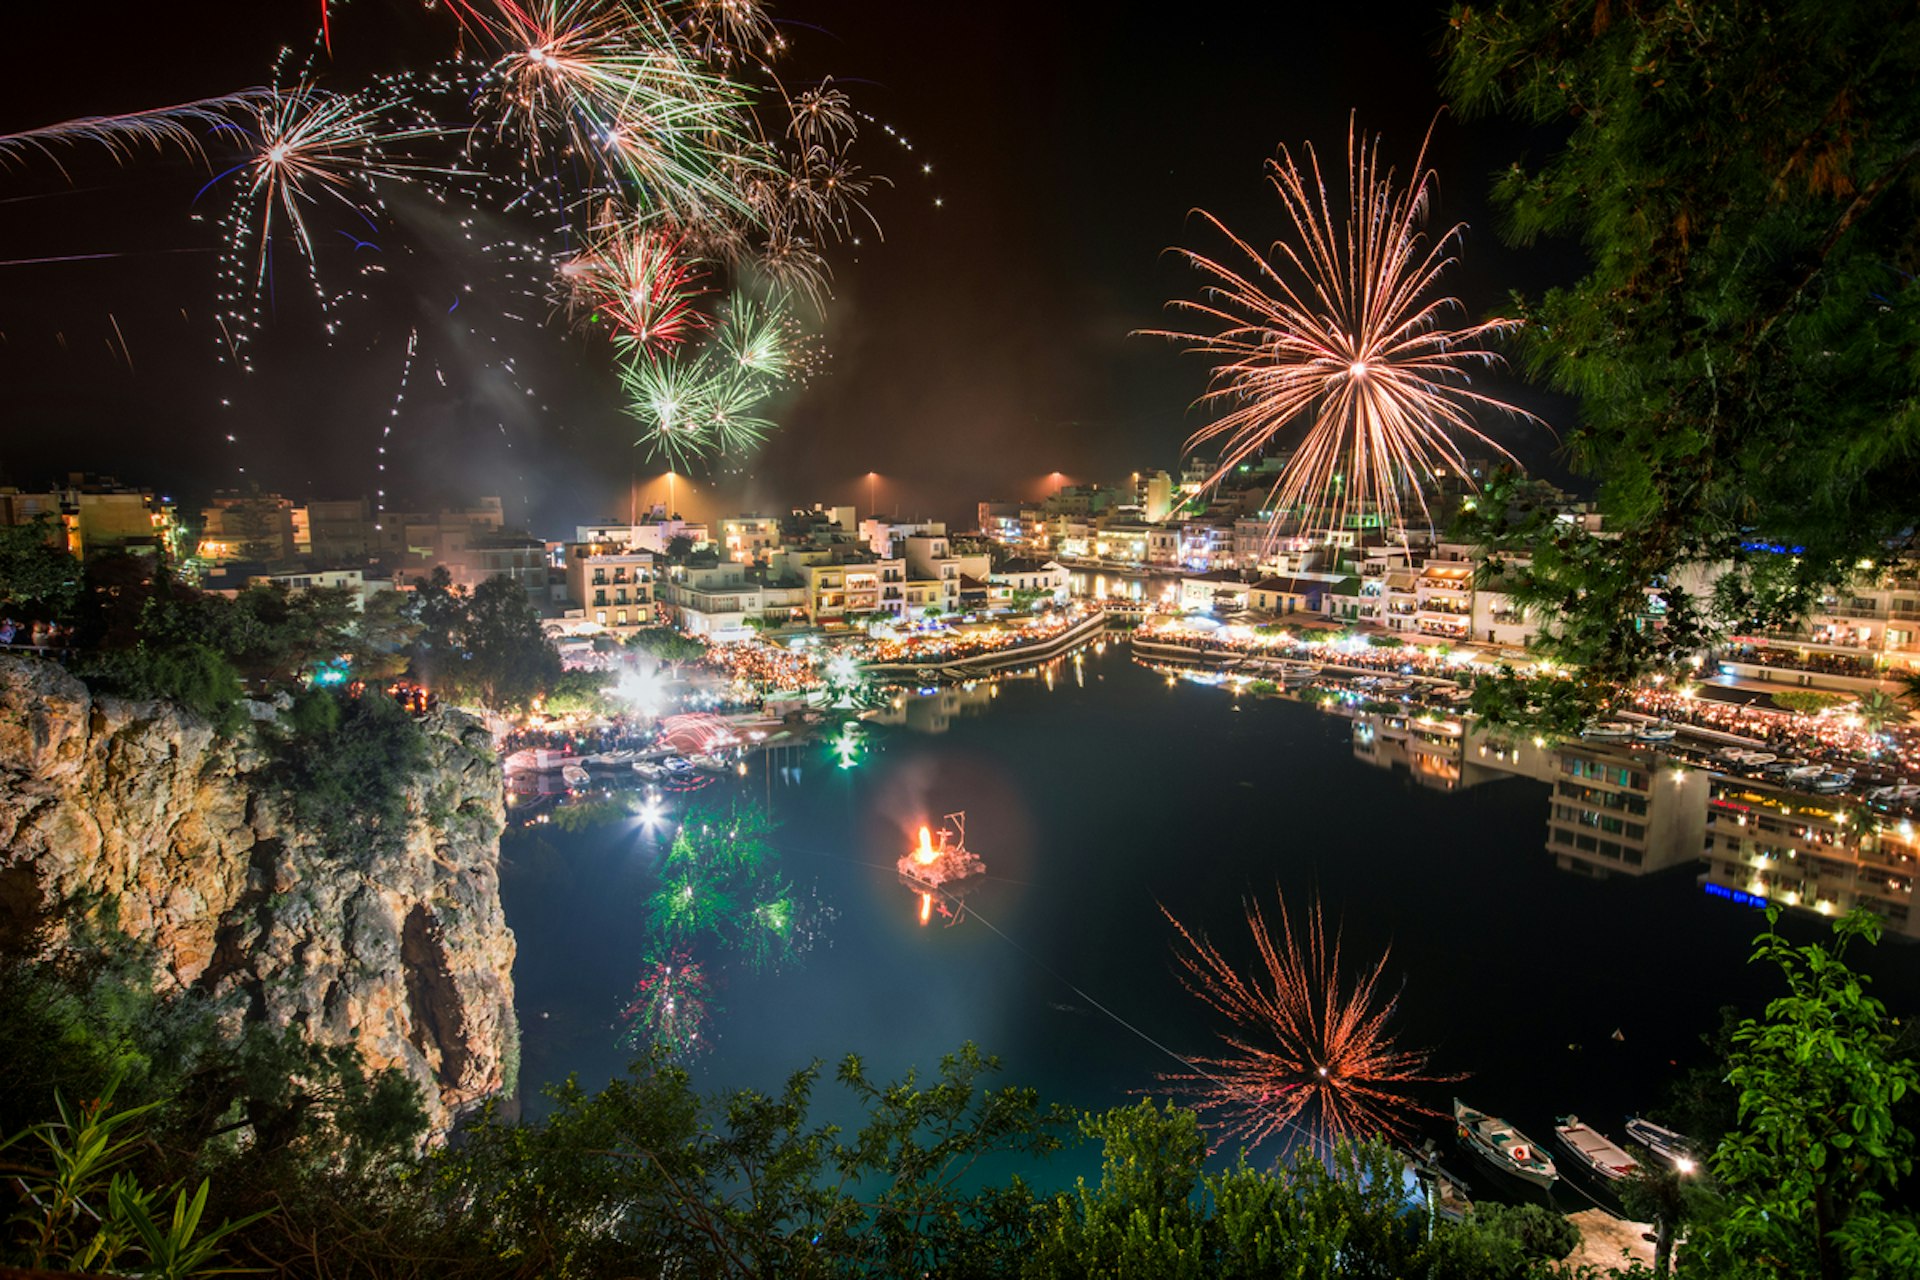 Fireworks light up the night sky above a coastal town